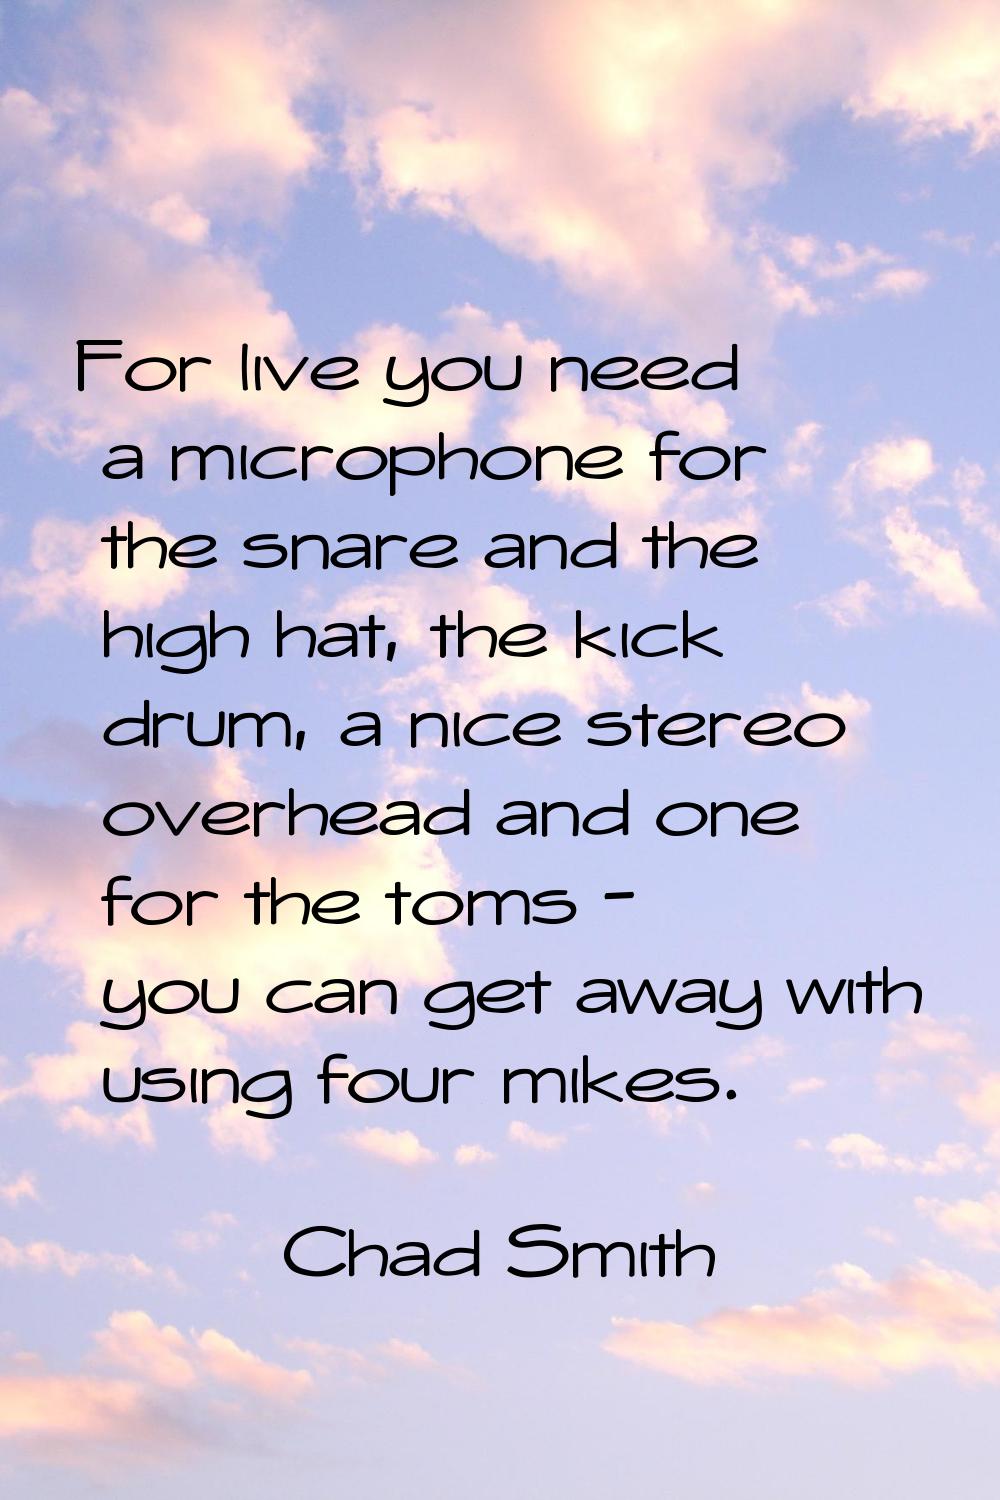 For live you need a microphone for the snare and the high hat, the kick drum, a nice stereo overhea